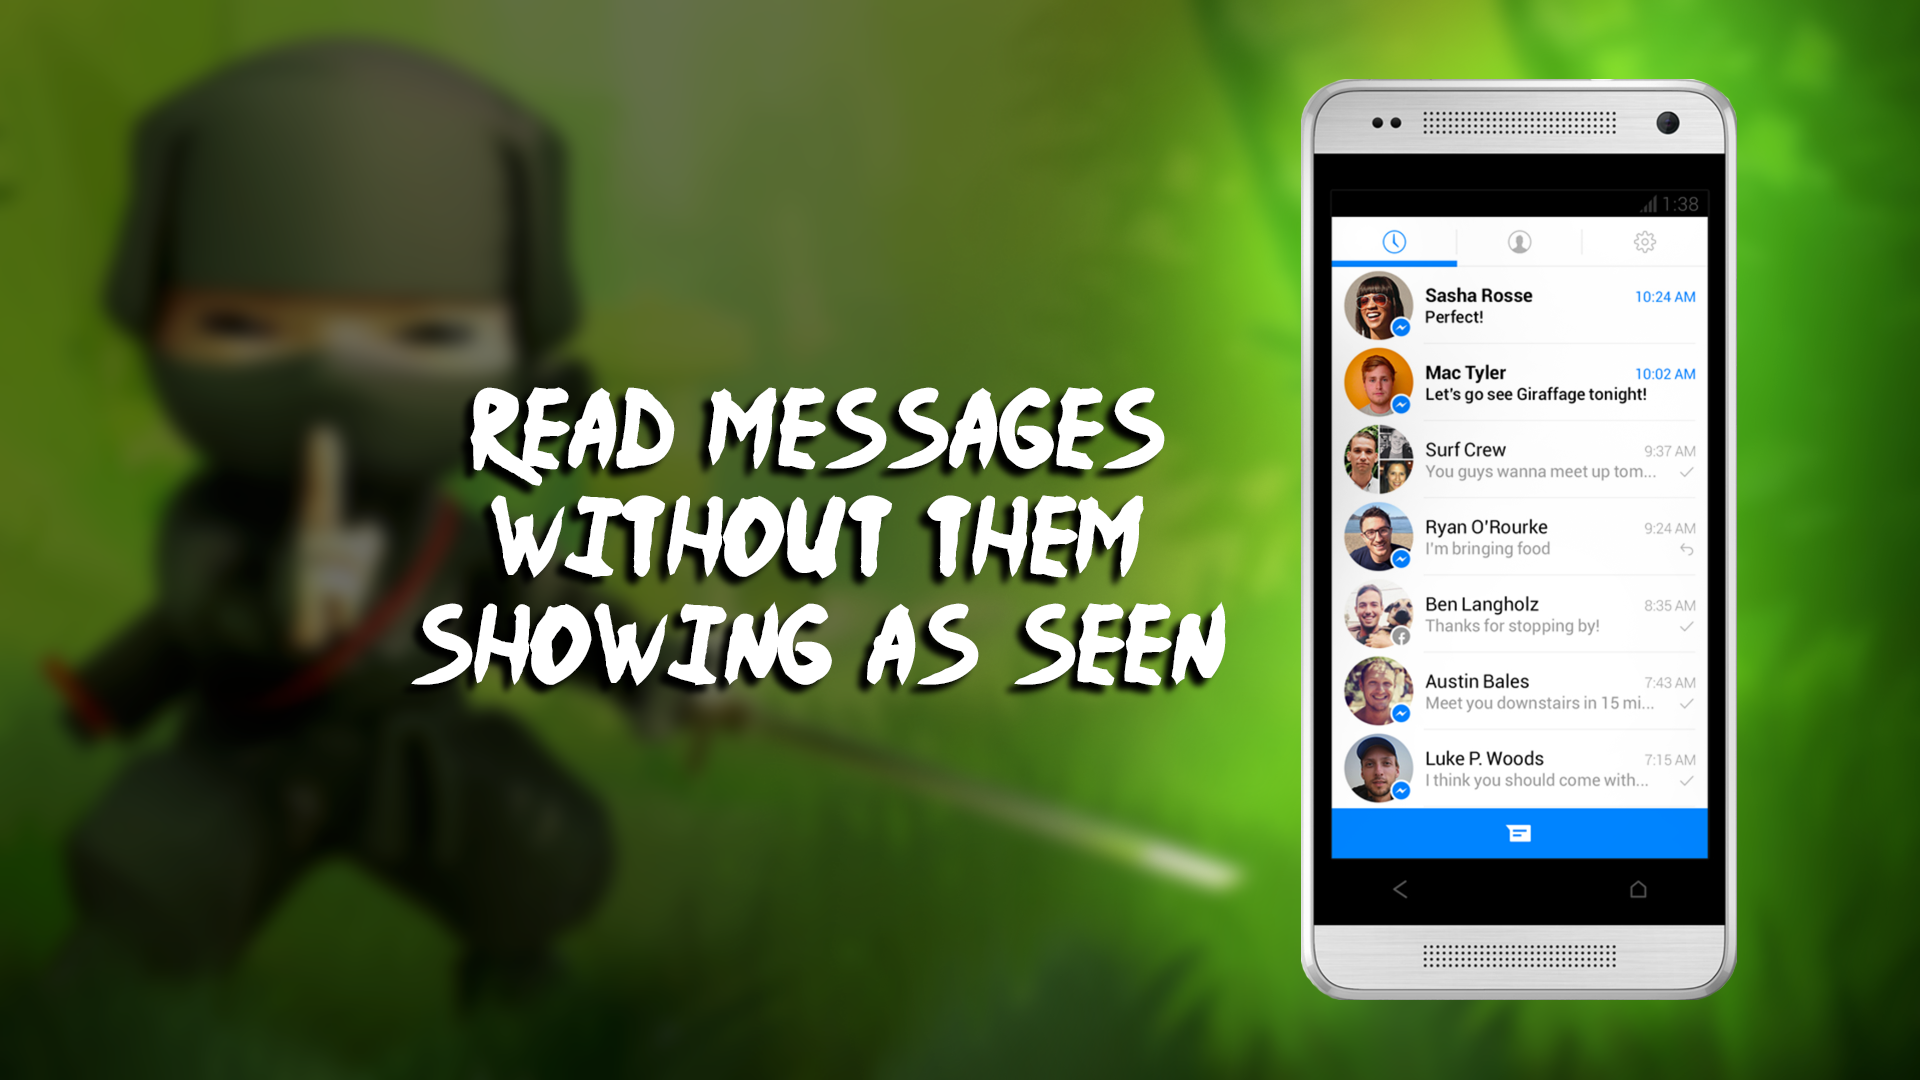 How_to_read_messages_without_them_showing_as_seen